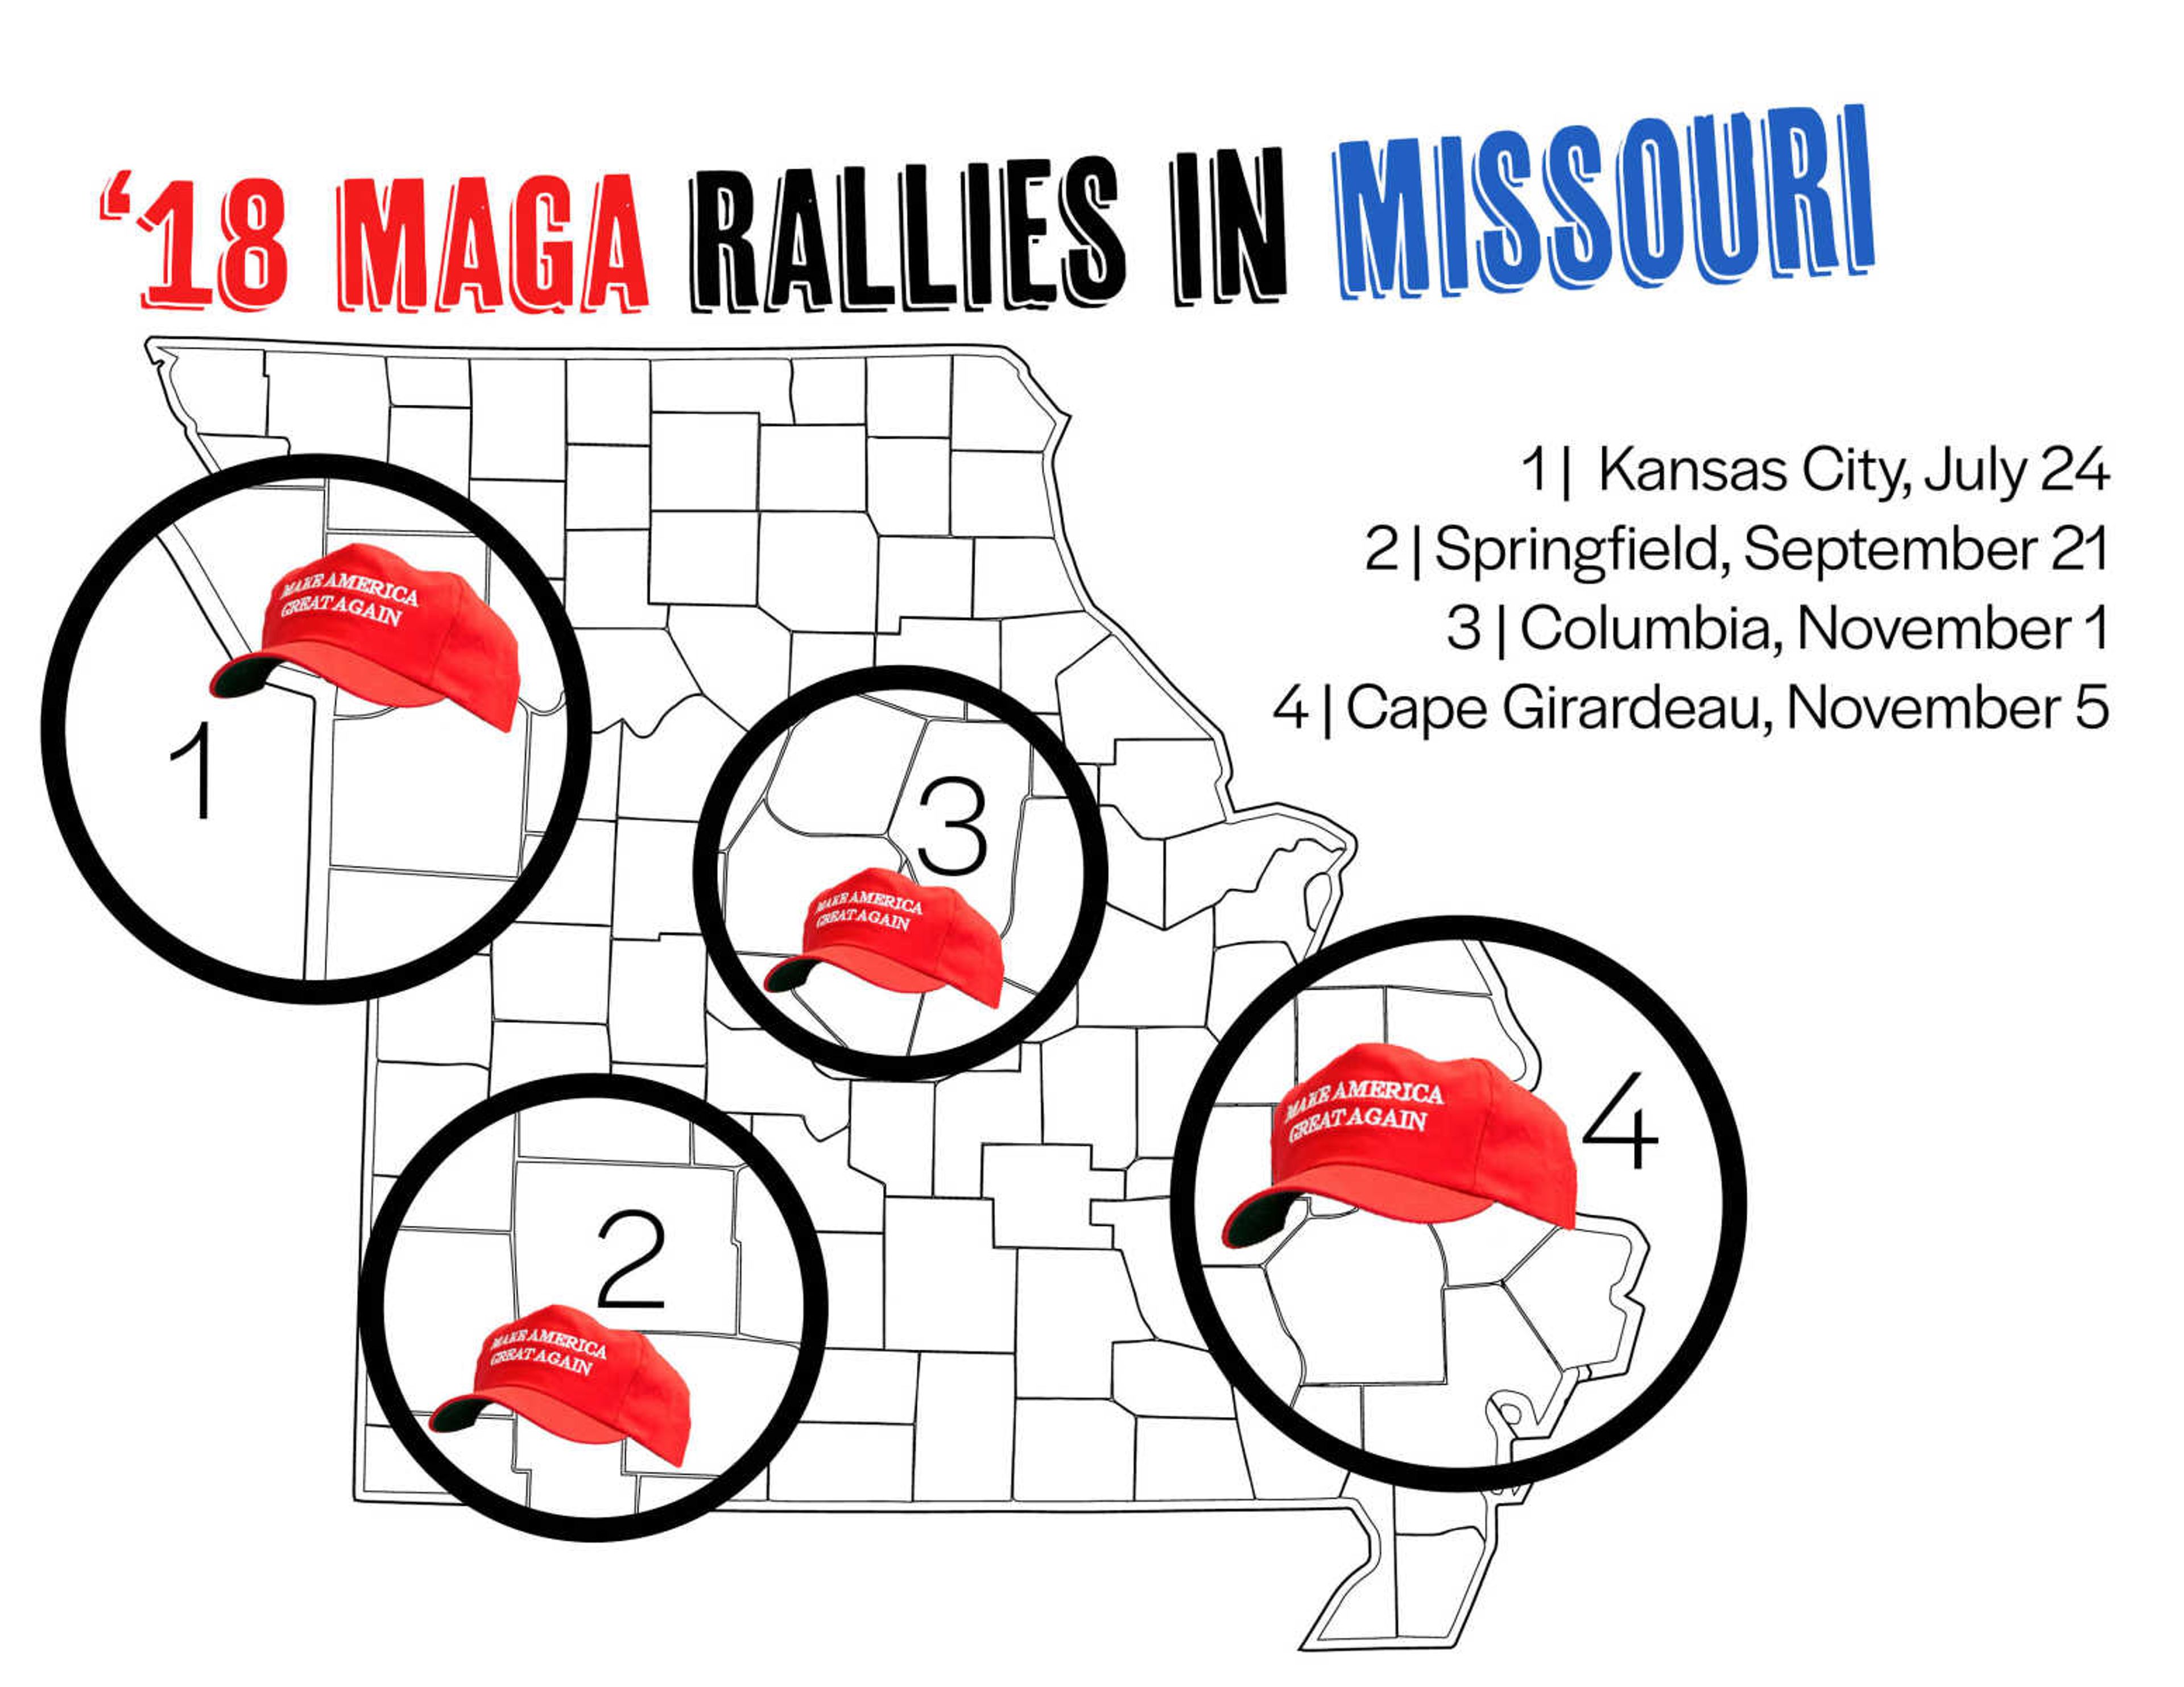 Trump holding MAGA rally at Show Me Center night before election